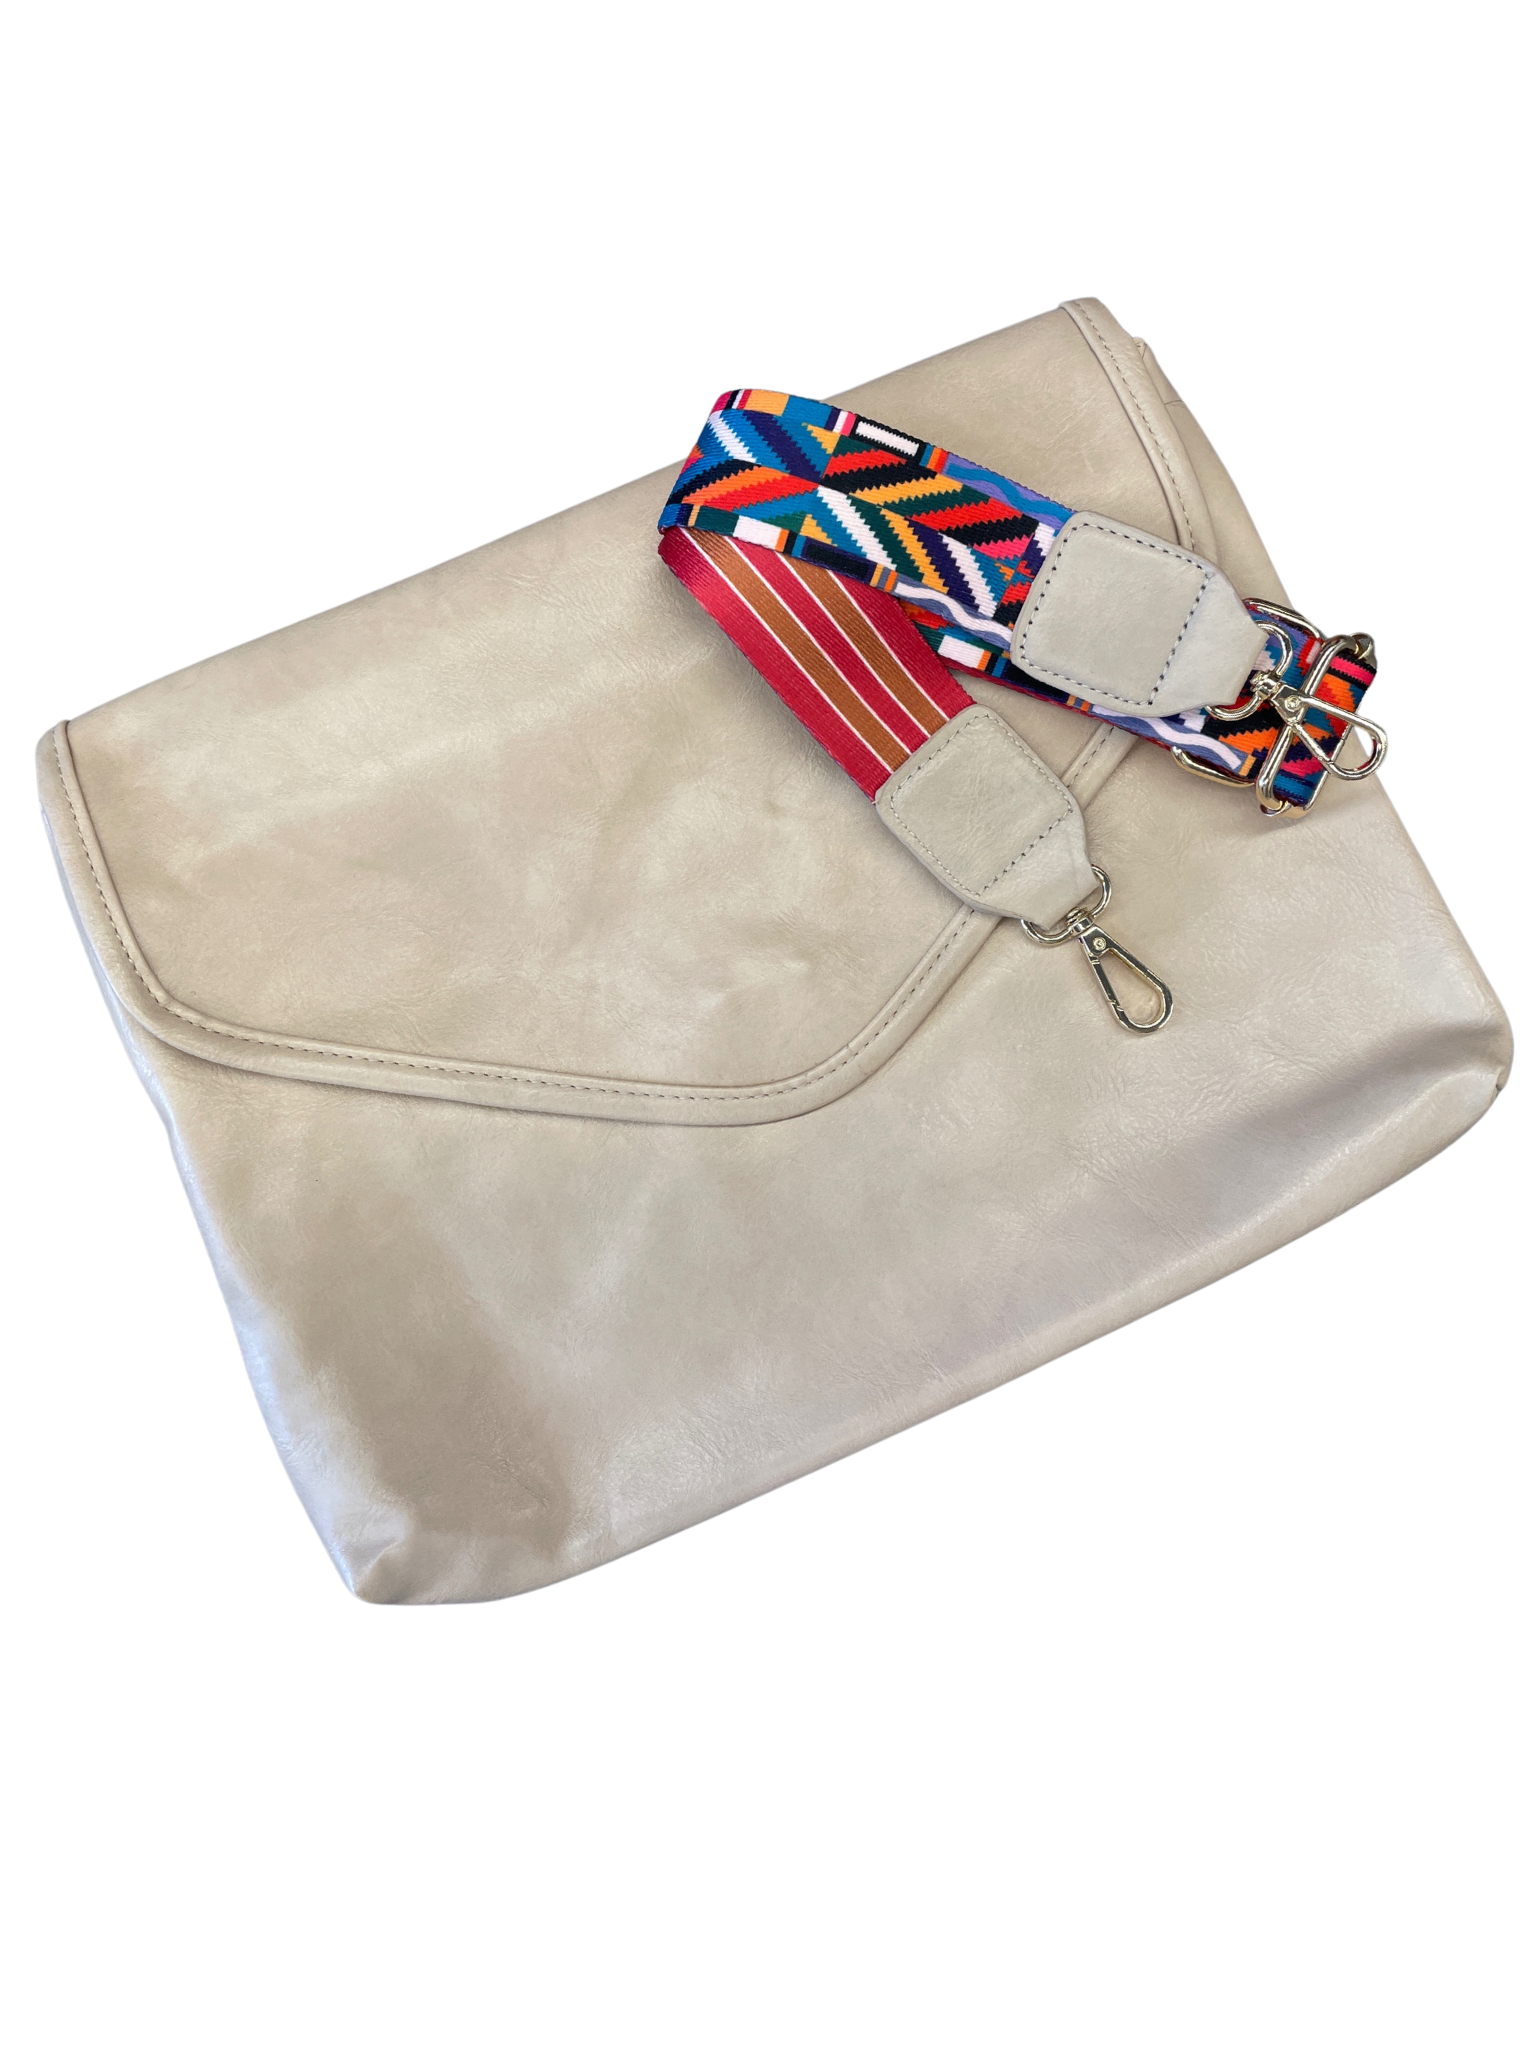 Vegan Leather  Discover an exceptional crossbody bag with hidden features! Boasting a zigzag design interior, 2 pockets, and zippered compartment inside and sporting a snap closure, zipper pocket outside with a customizable strap that can be removed or adjusted to your liking.  Size: 13.5"x10.25"